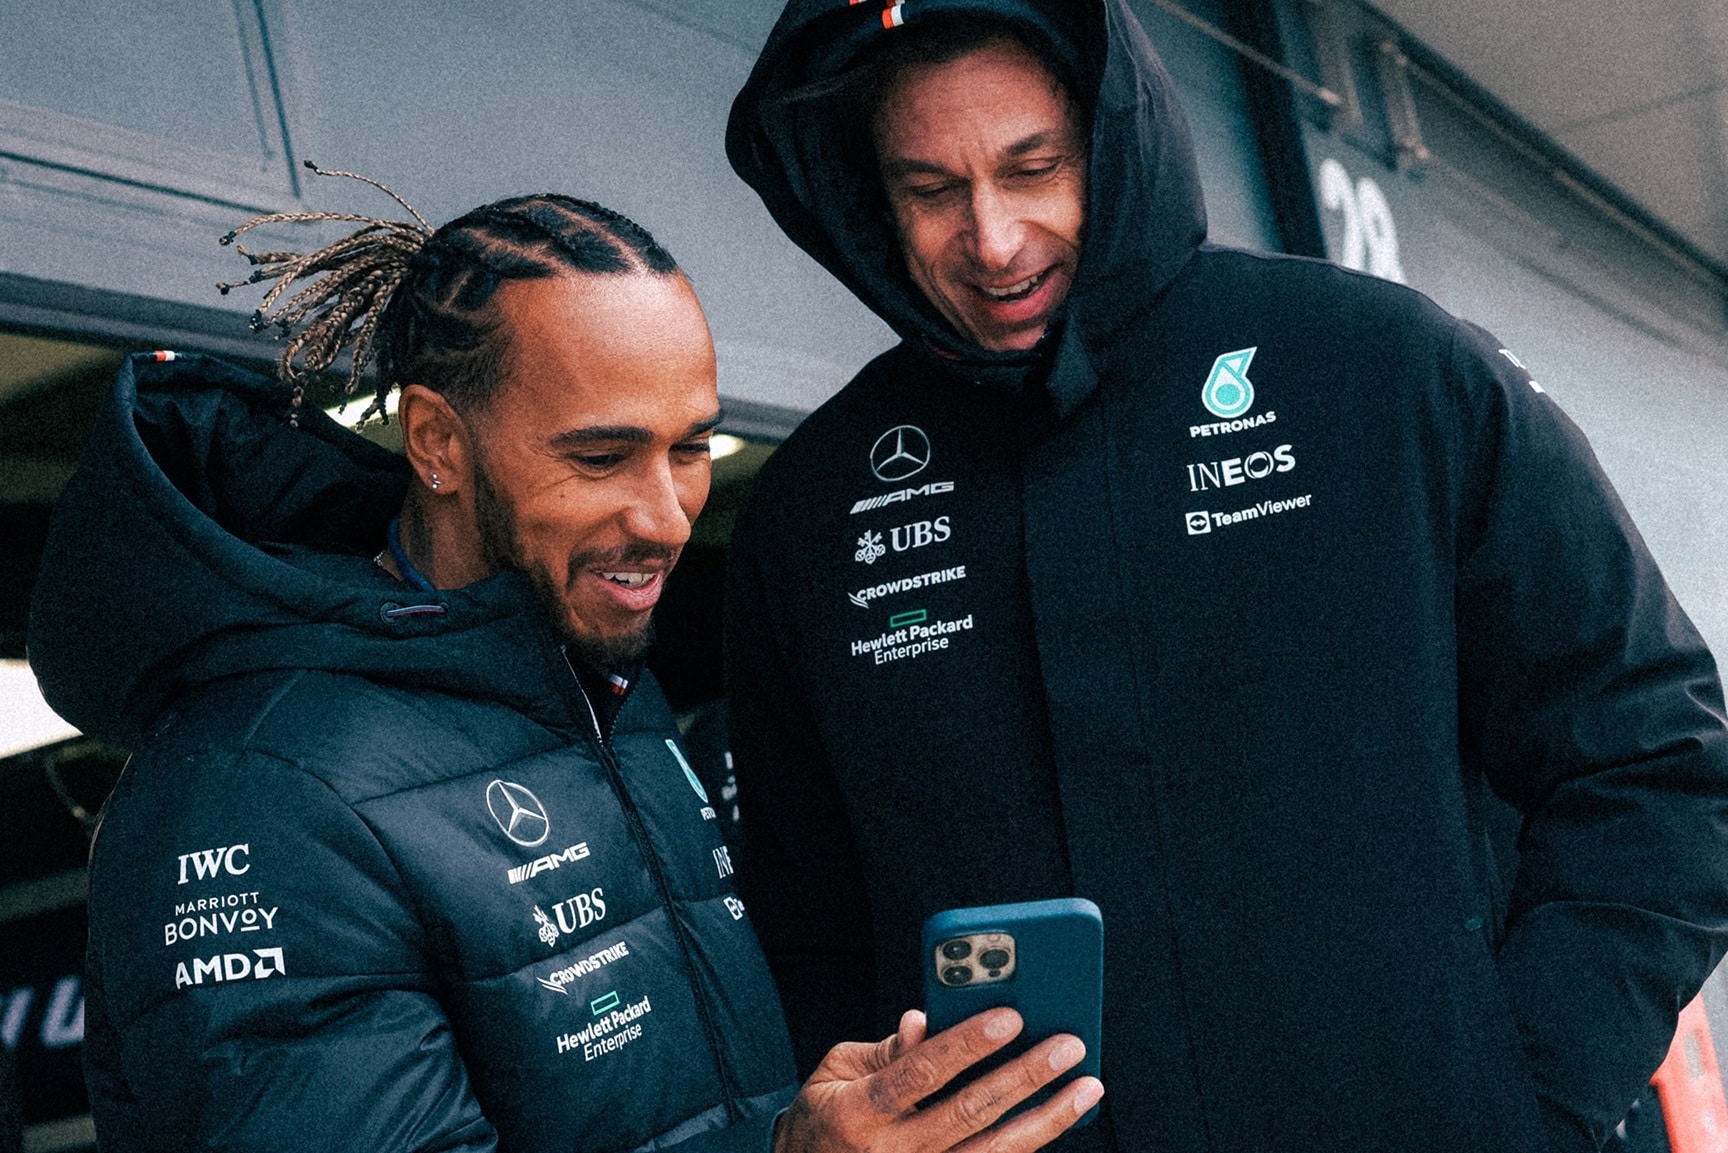 - Wolff: A "few hours" from now, a new Hamilton F1 contract will be finalized.